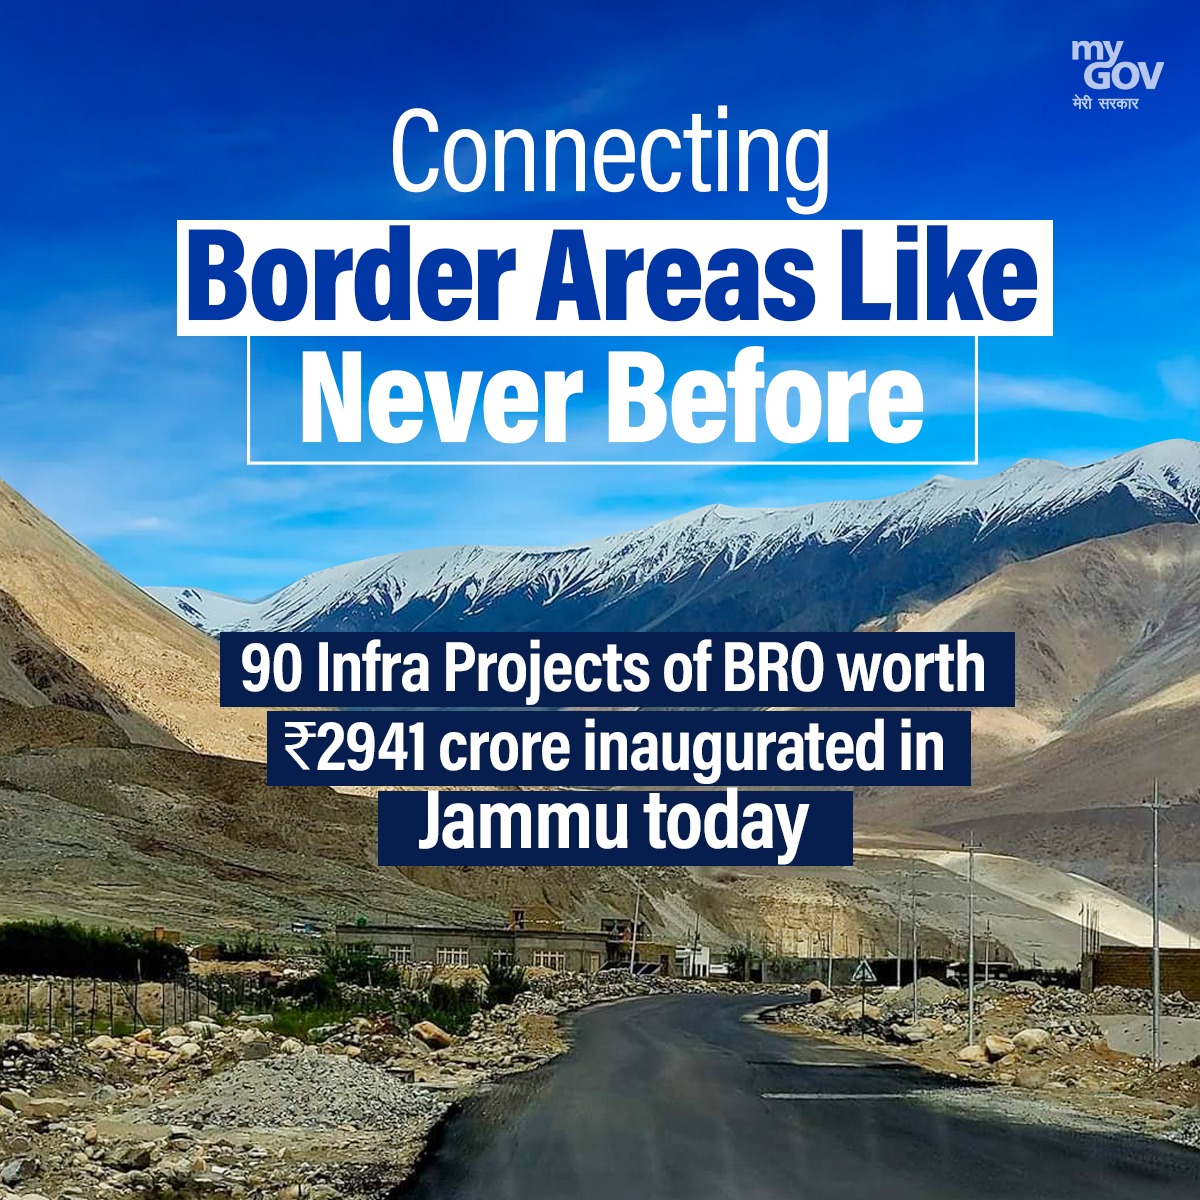 Strengthening Connections in Border Areas! Today, a significant milestone is reached as 90 infrastructure projects by BRO are inaugurated in #Jammu. #BRO #NewIndia #Connectivity